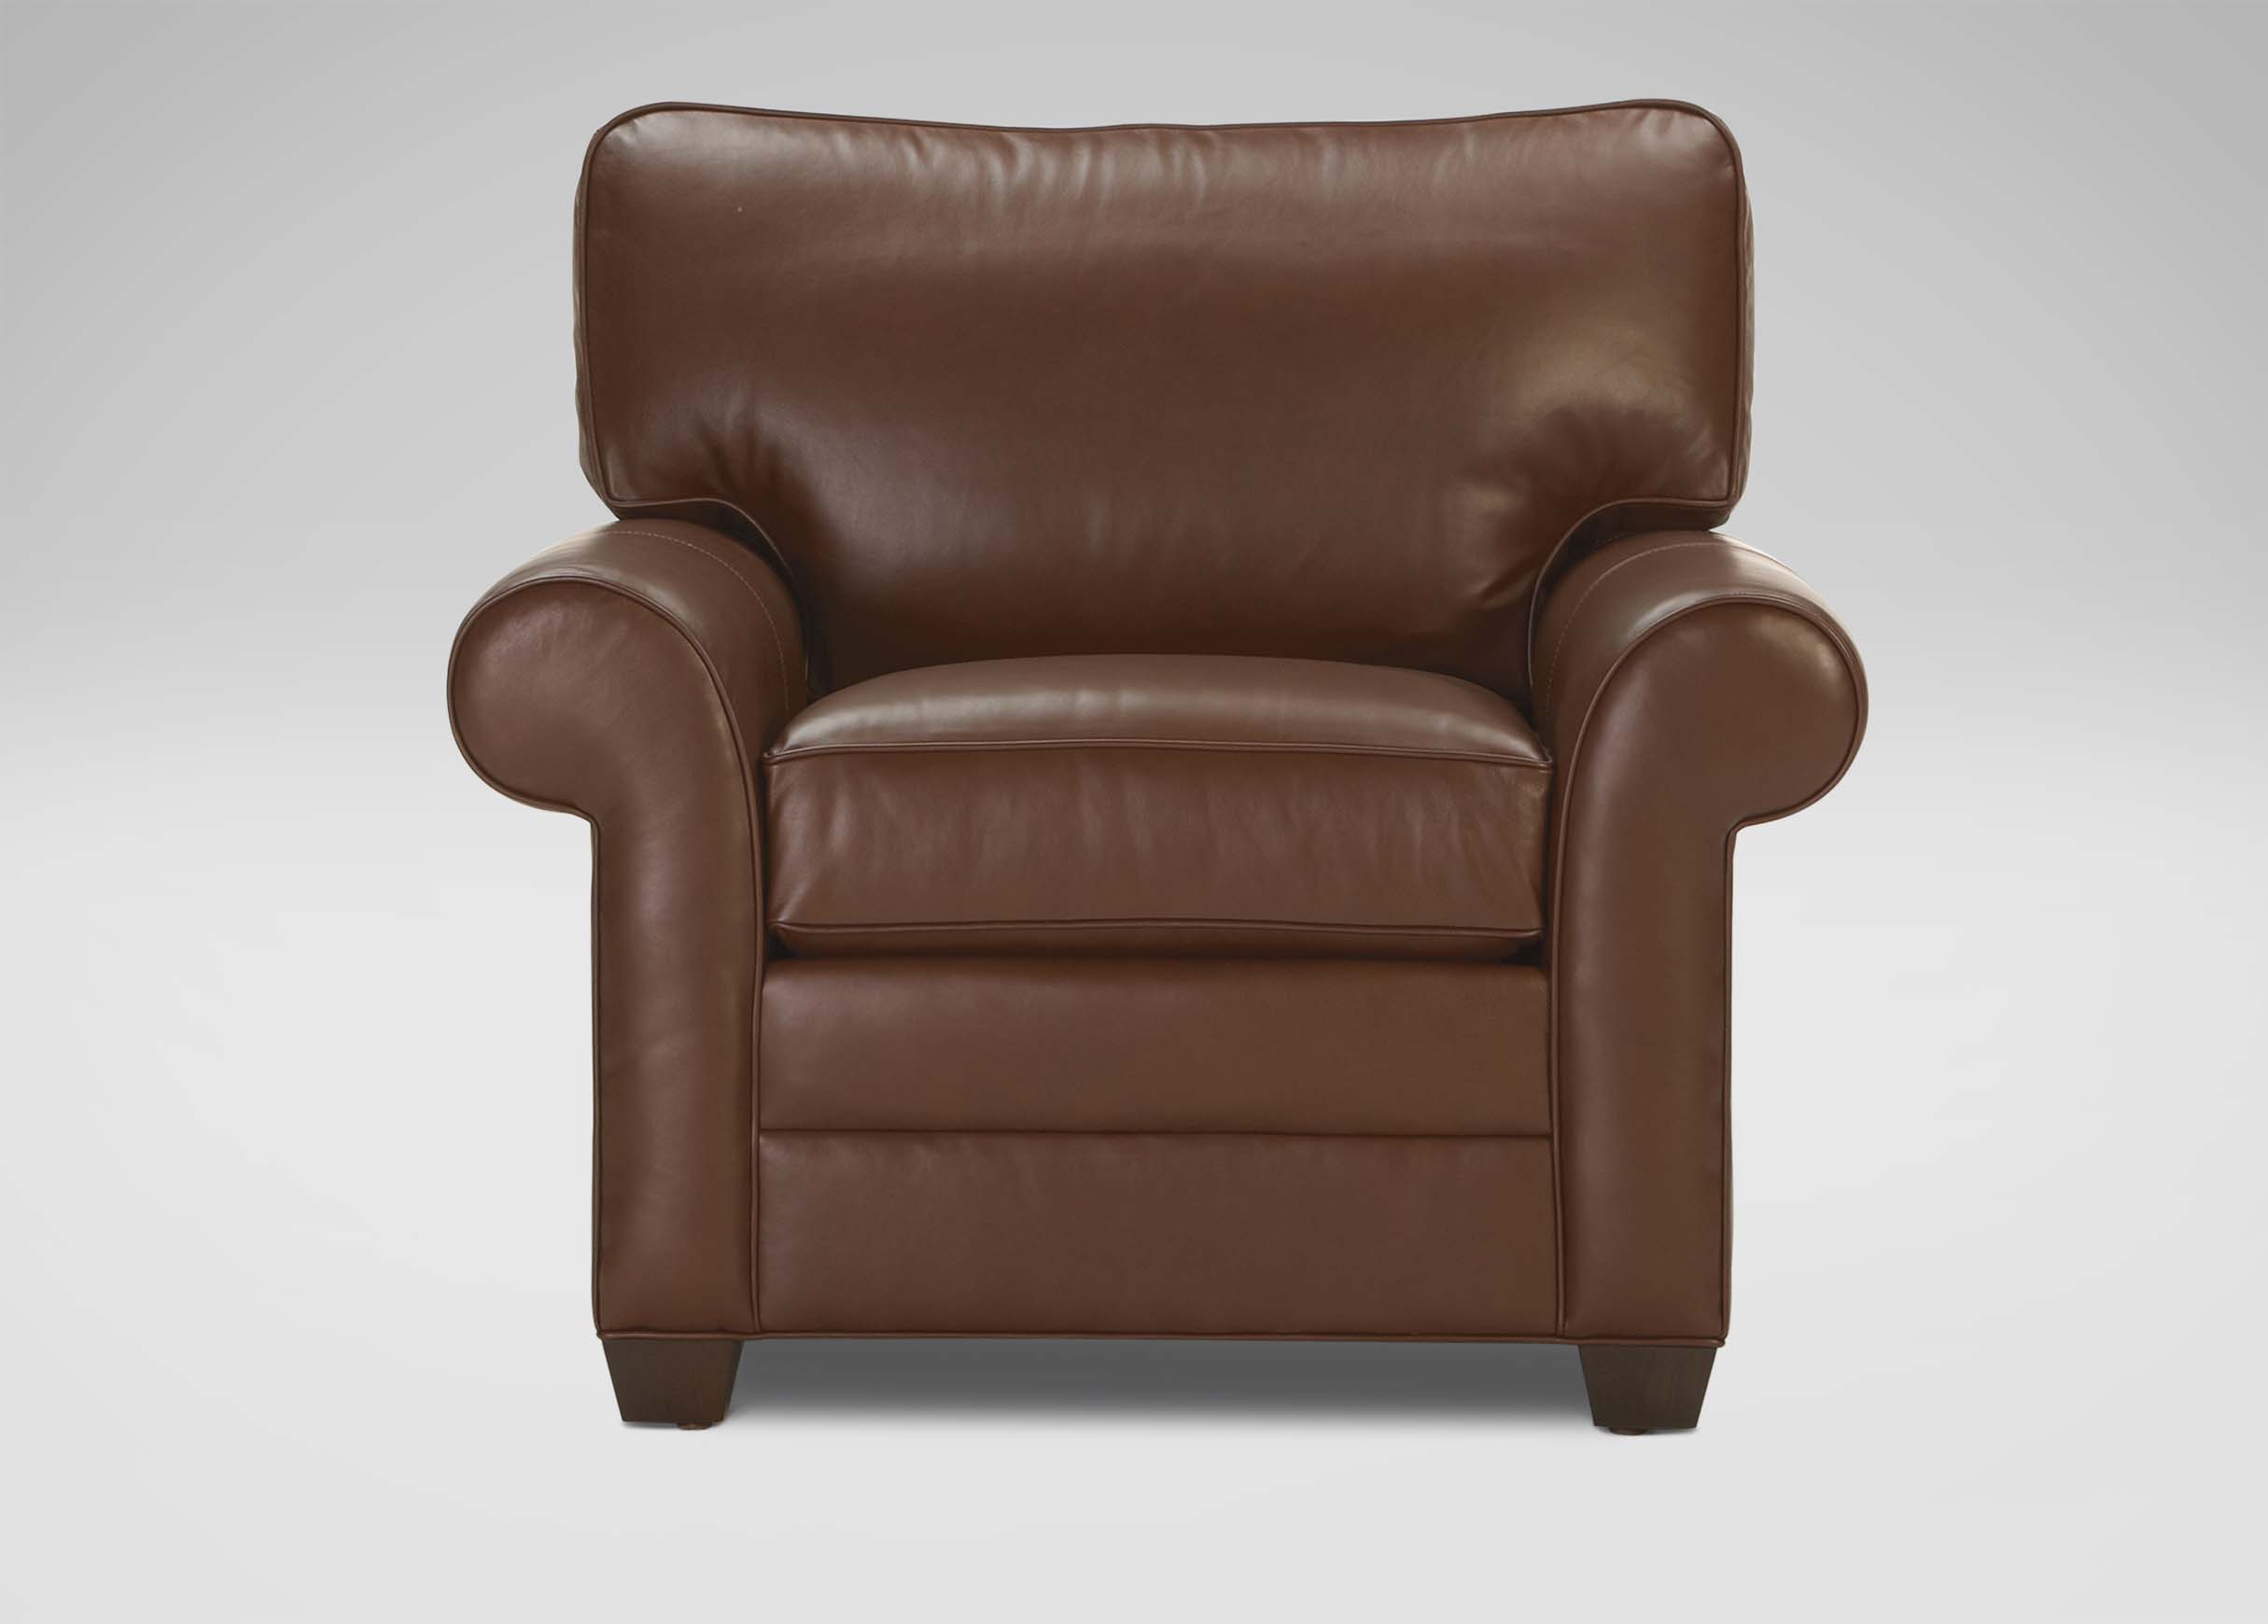 RollArm Leather Chair Chairs & Chaises